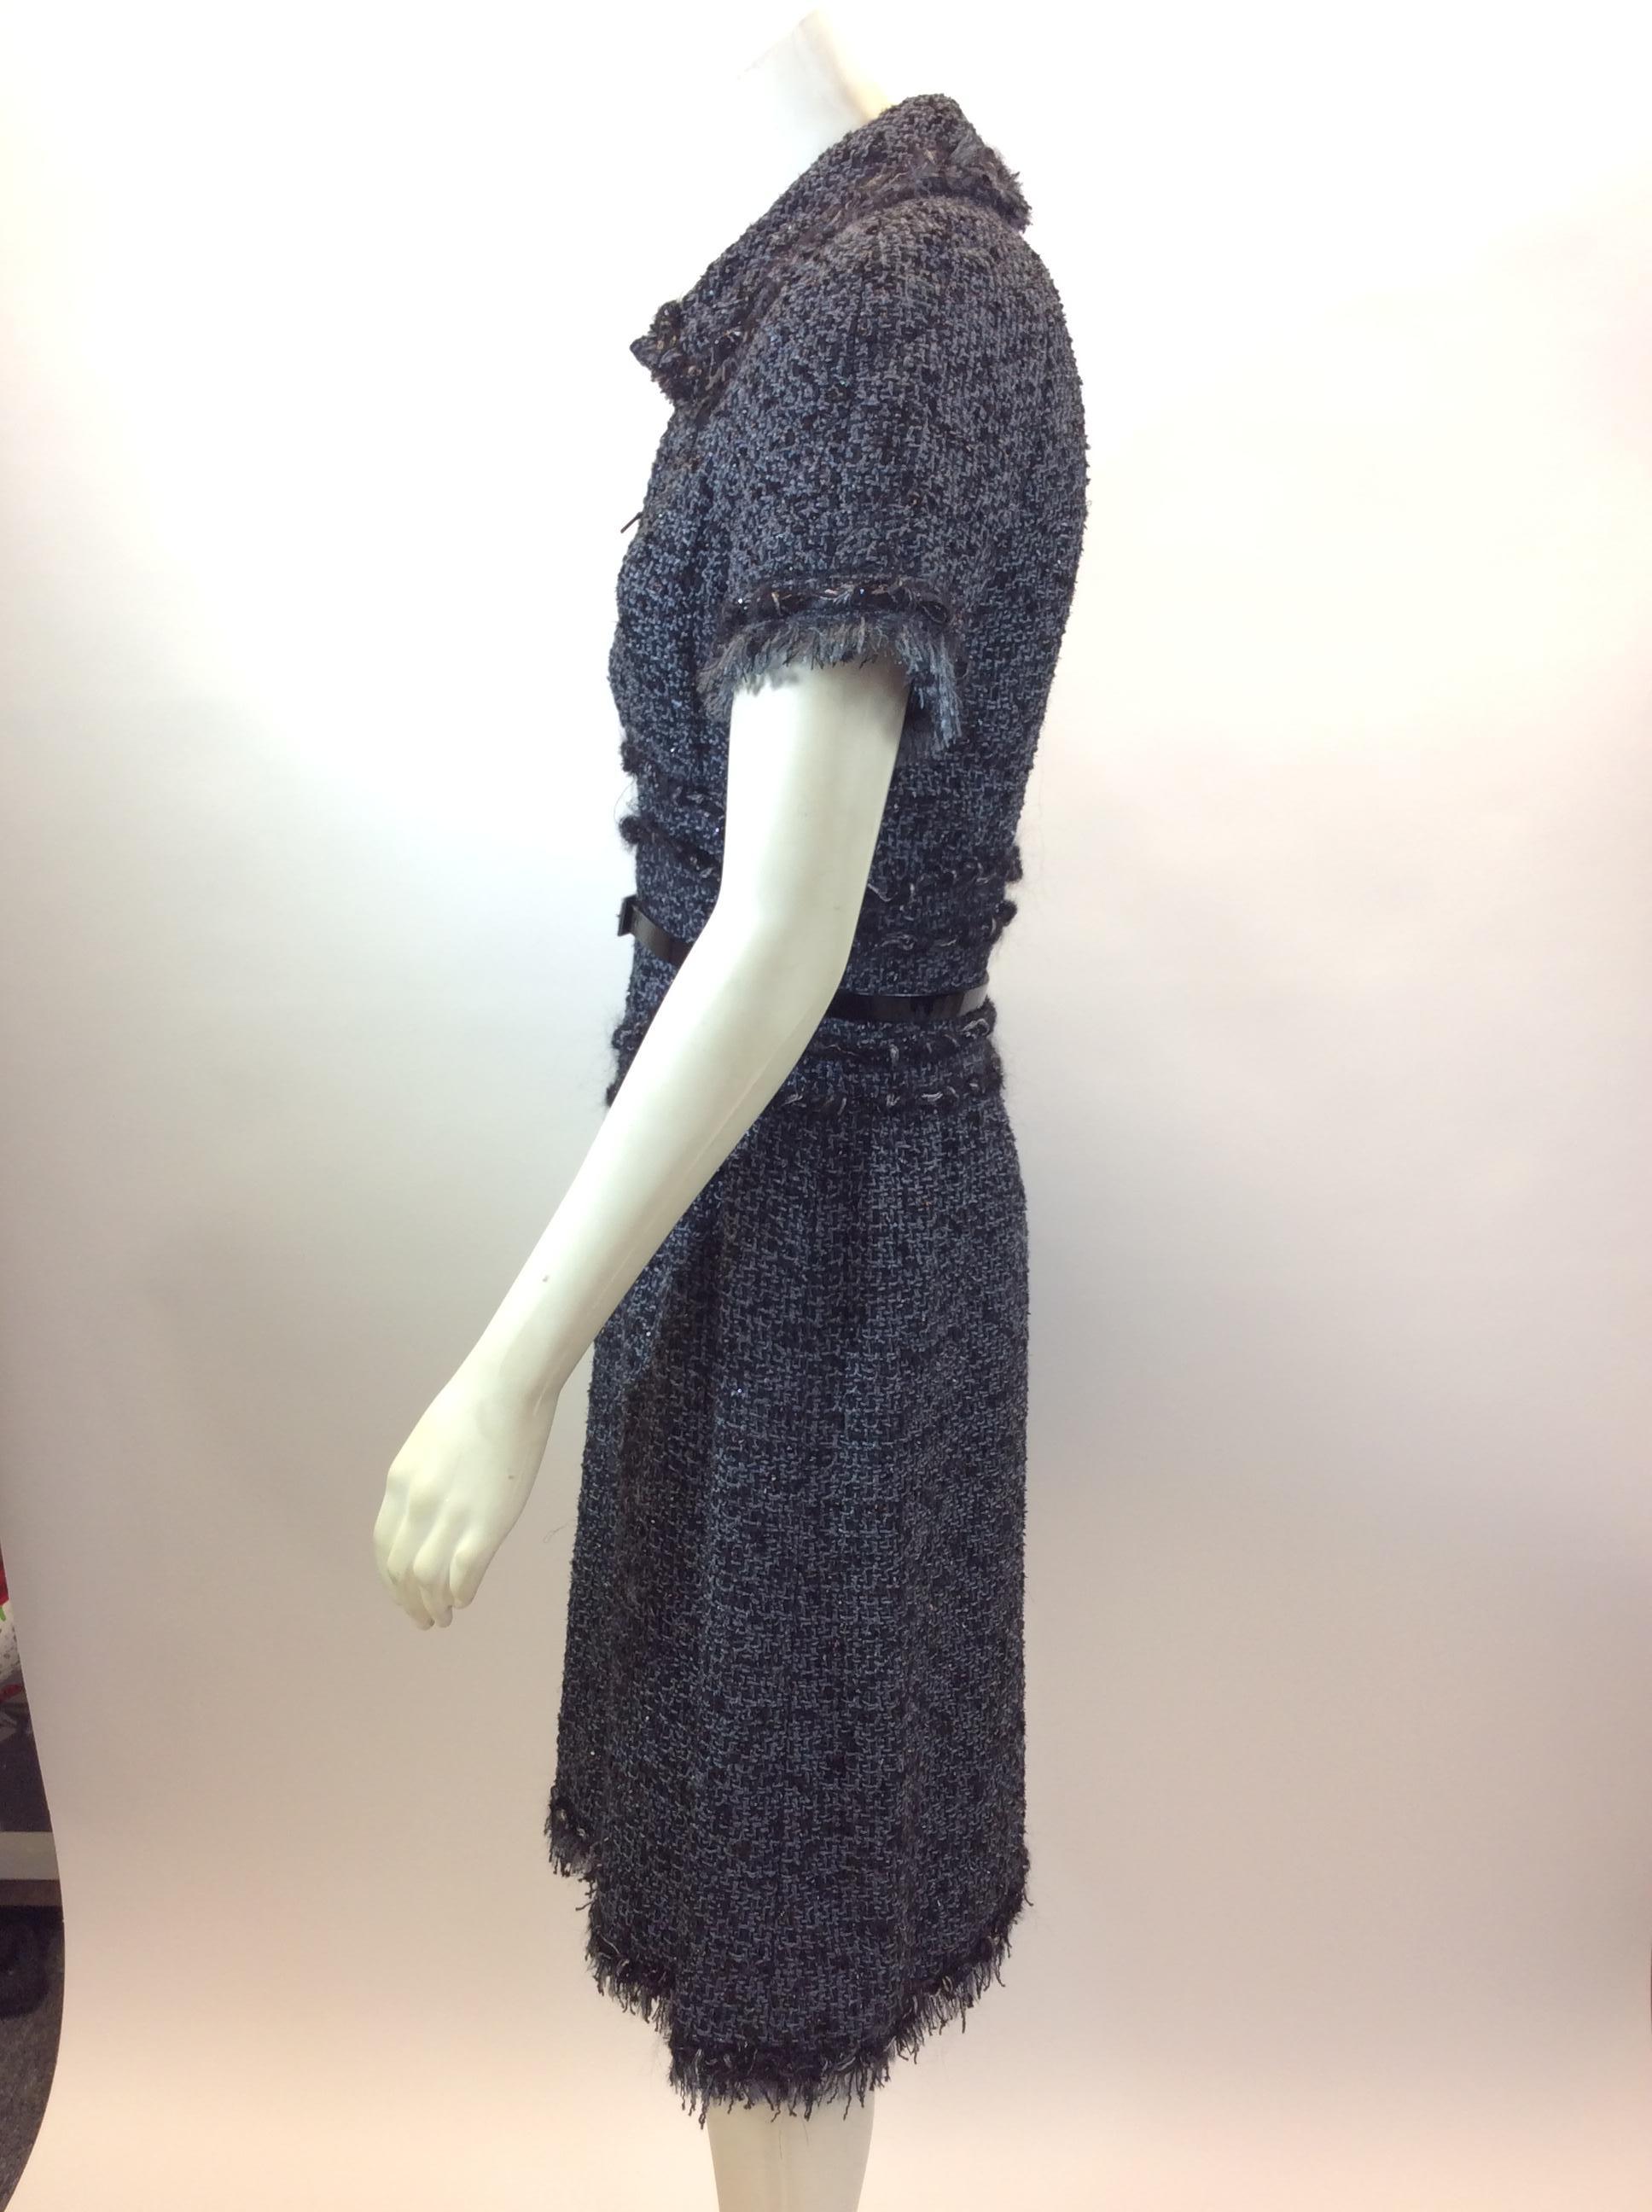 Chanel Grey and Black Tweed Belted Dress
$1999
Made in France
50% nylon, 27% polyester, 16% cotton, 7% wool
Size 38
Length 38